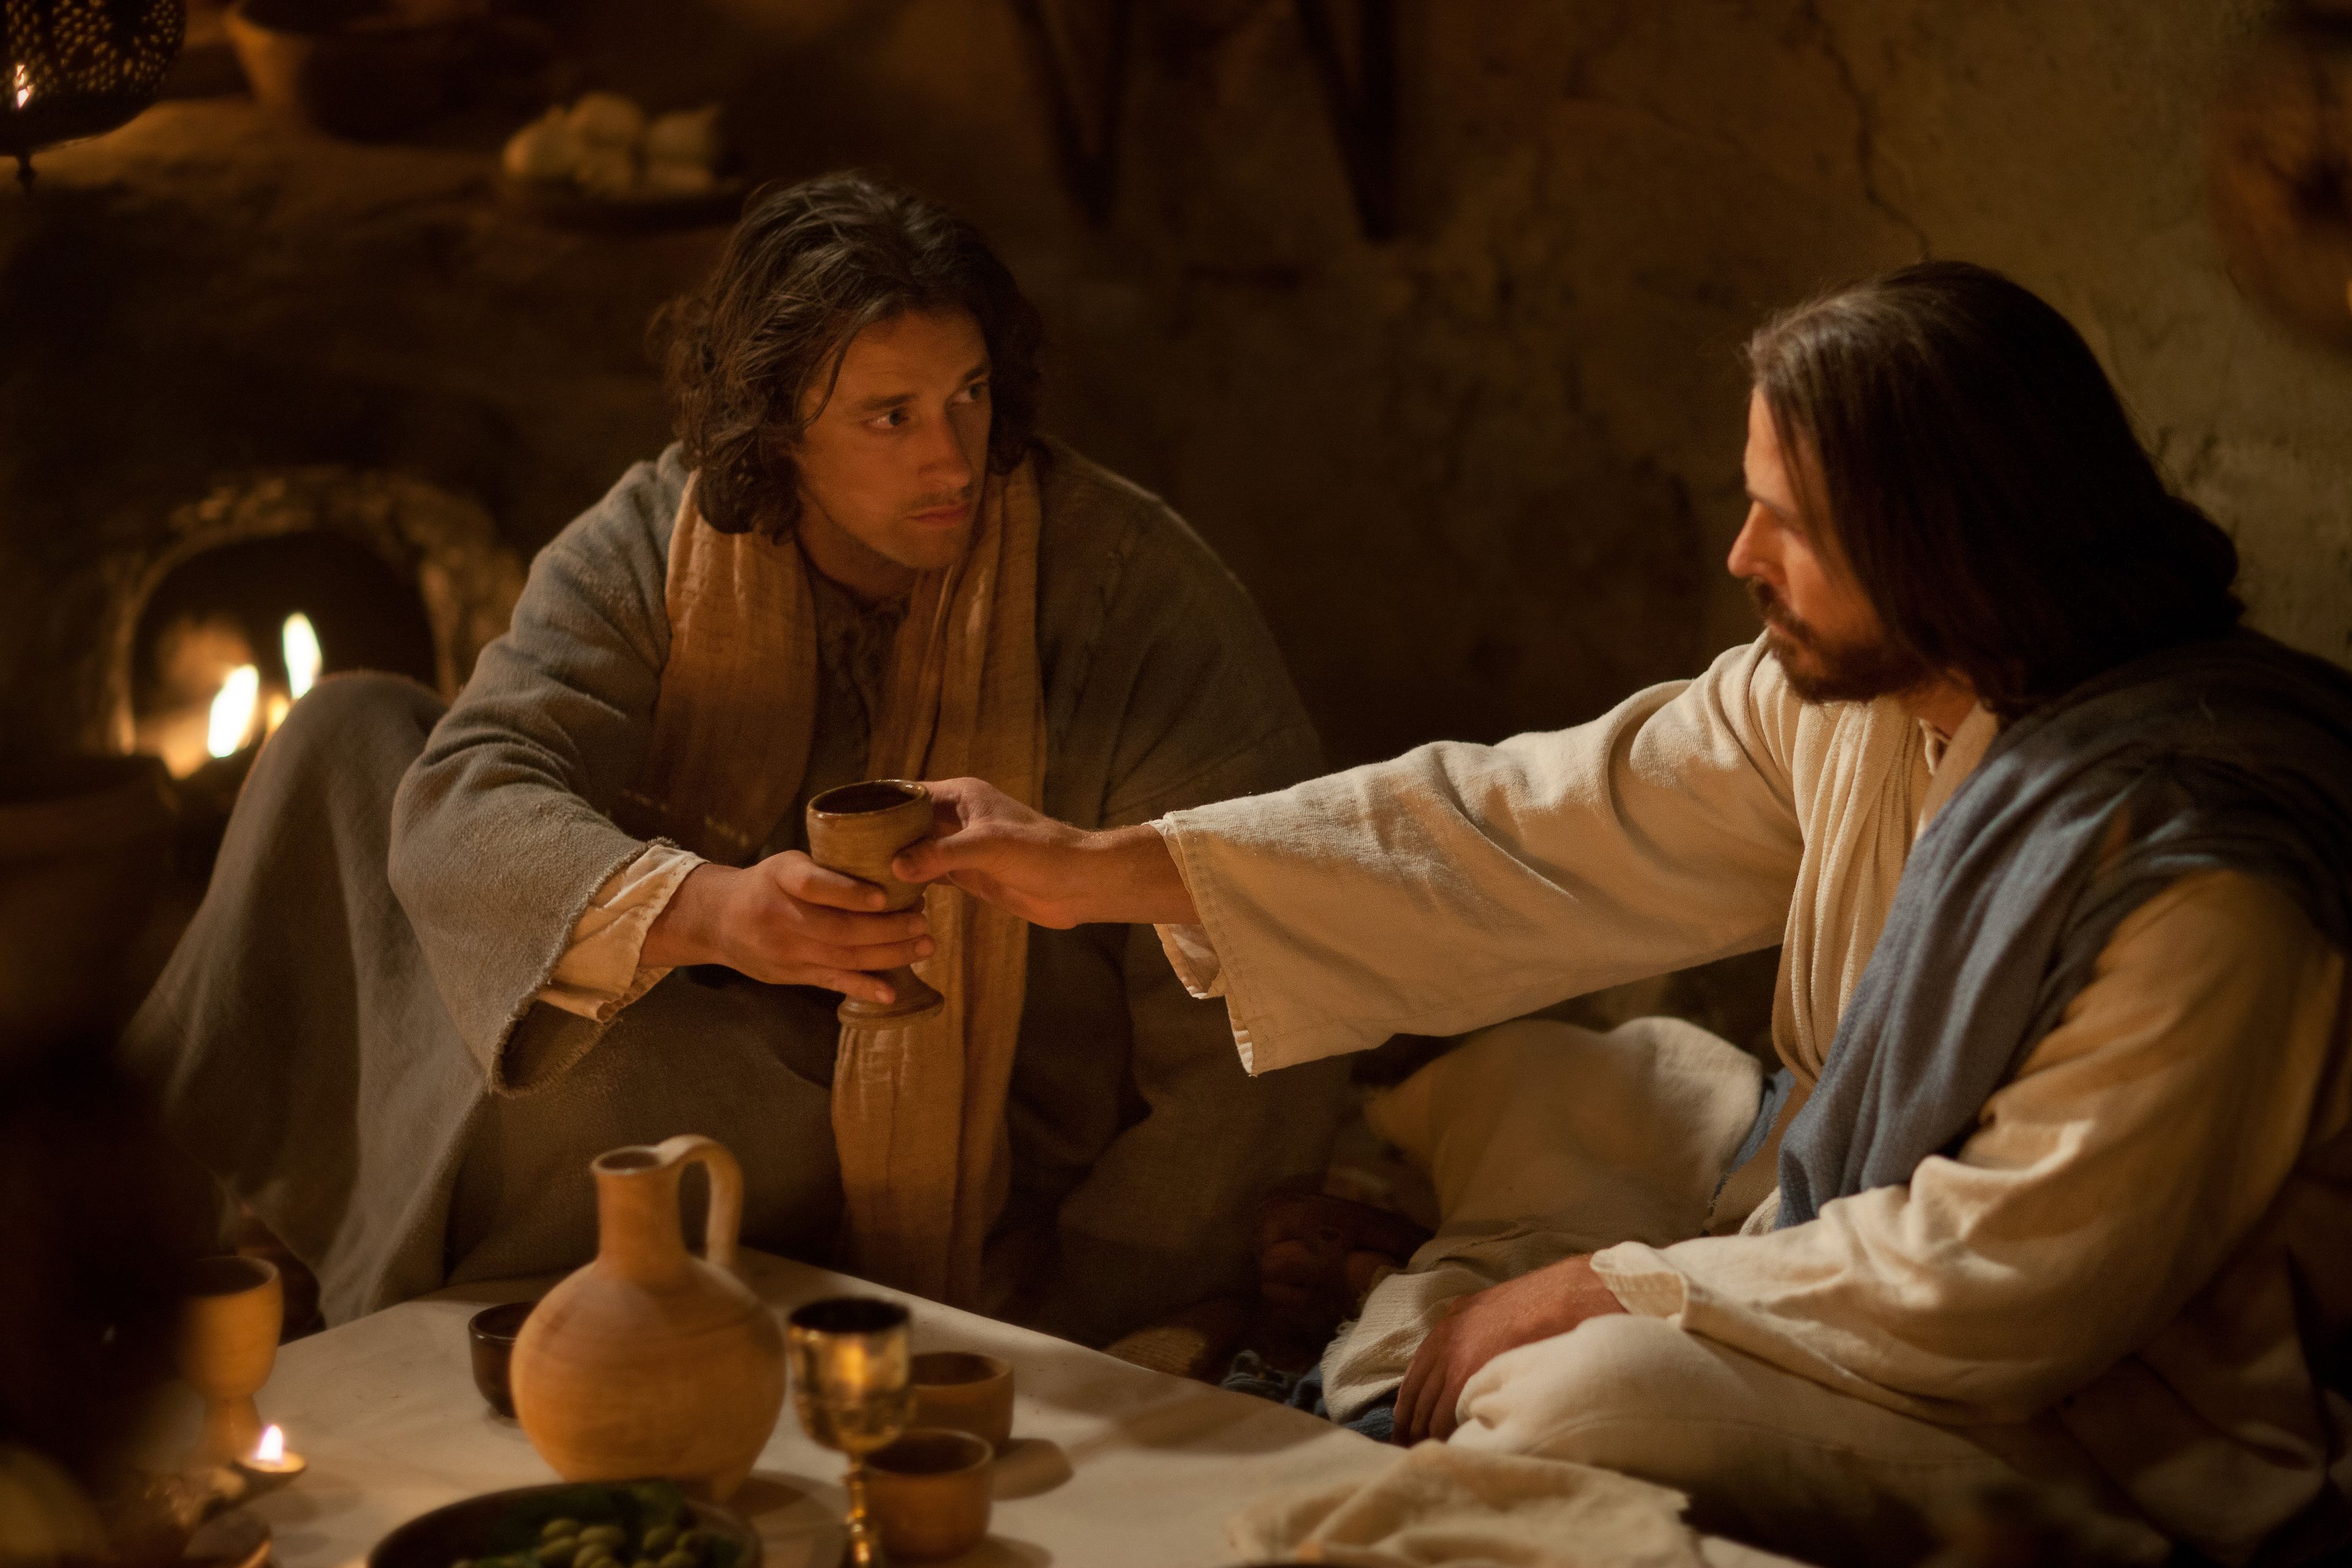 Jesus blesses and passes wine, which represents his blood, at the Last Supper with the Apostles.